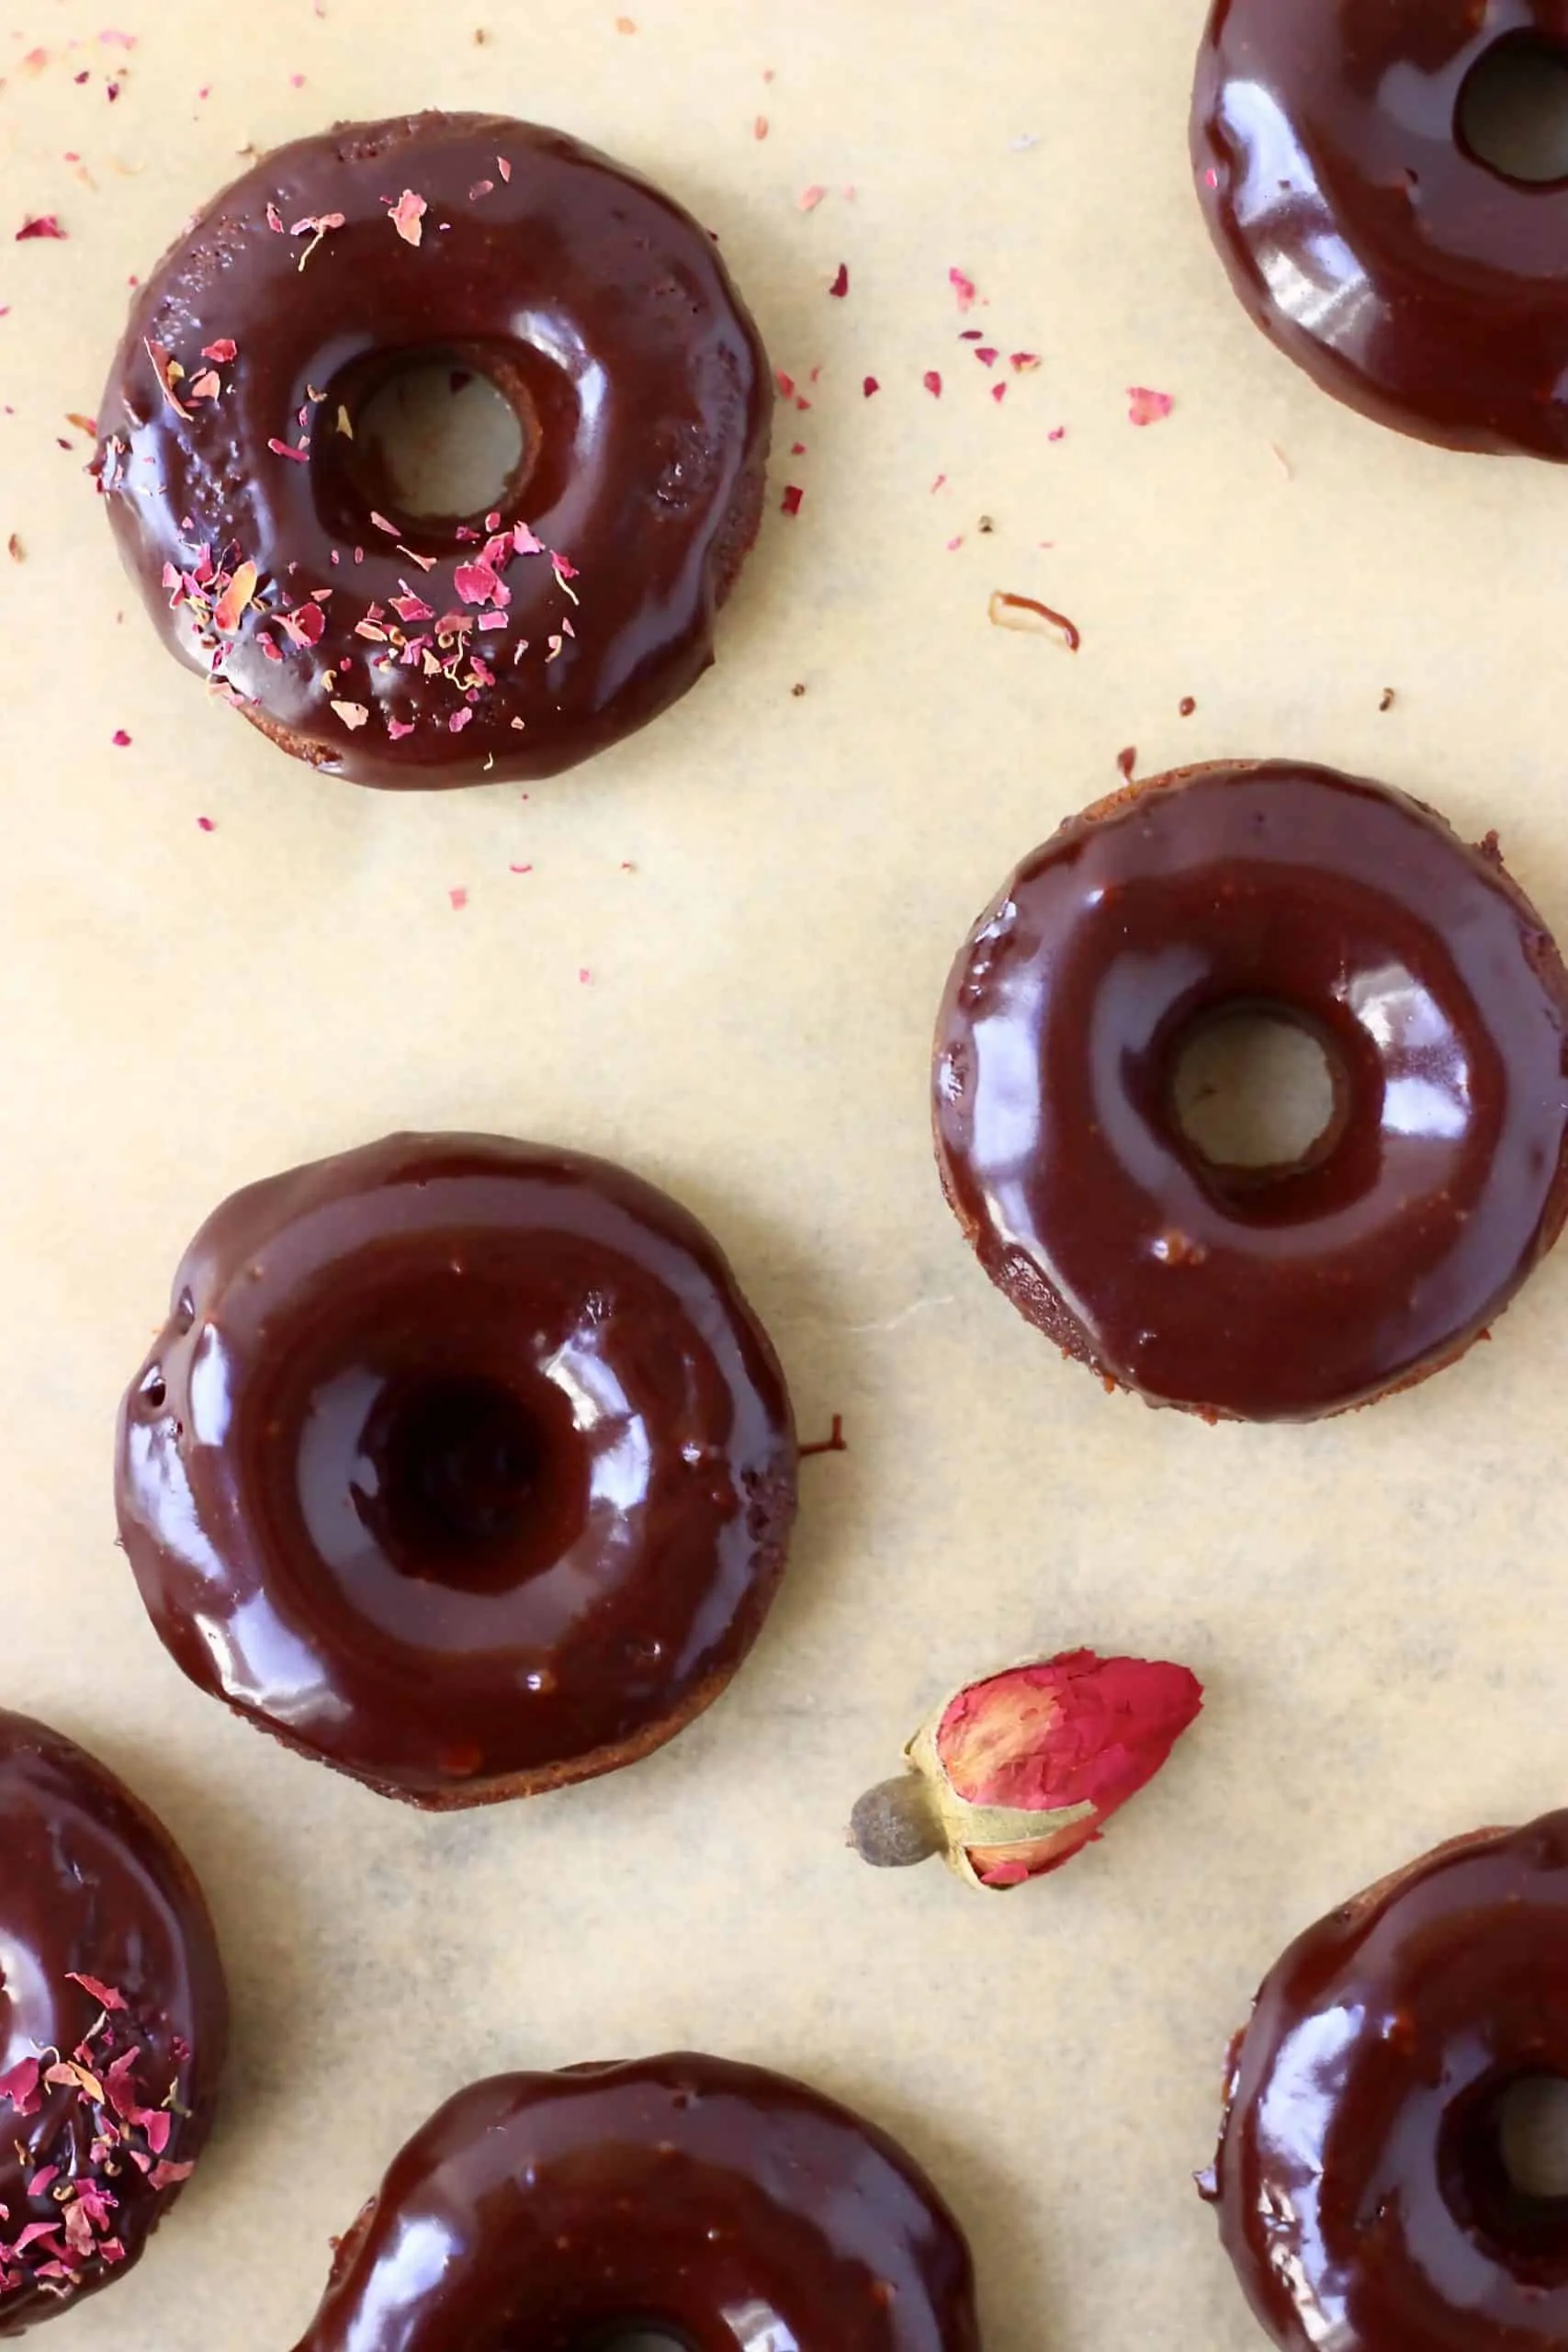 Six vegan chocolate baked donuts on a sheet of baking paper